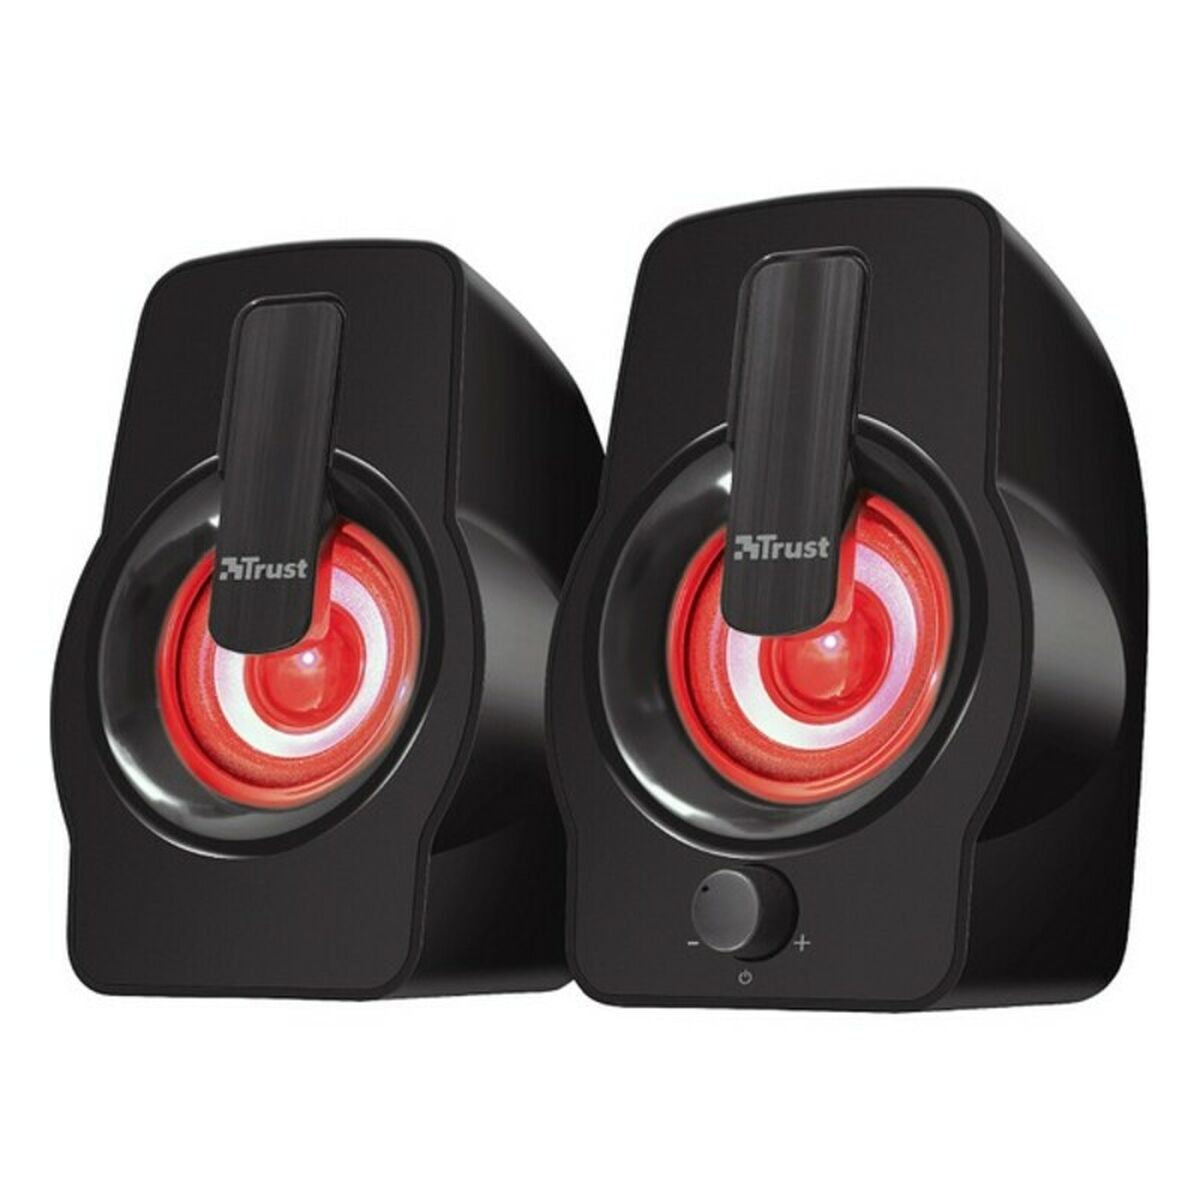 PC Speakers Trust Gemi RGB Black 6 W 12 W, Trust, Computing, Accessories, pc-speakers-trust-gemi-rgb-black-6-w-12-w, Brand_Trust, category-reference-2609, category-reference-2642, category-reference-2945, category-reference-t-19685, category-reference-t-19908, category-reference-t-21340, category-reference-t-25571, computers / peripherals, Condition_NEW, entertainment, music, office, Price_20 - 50, Teleworking, RiotNook